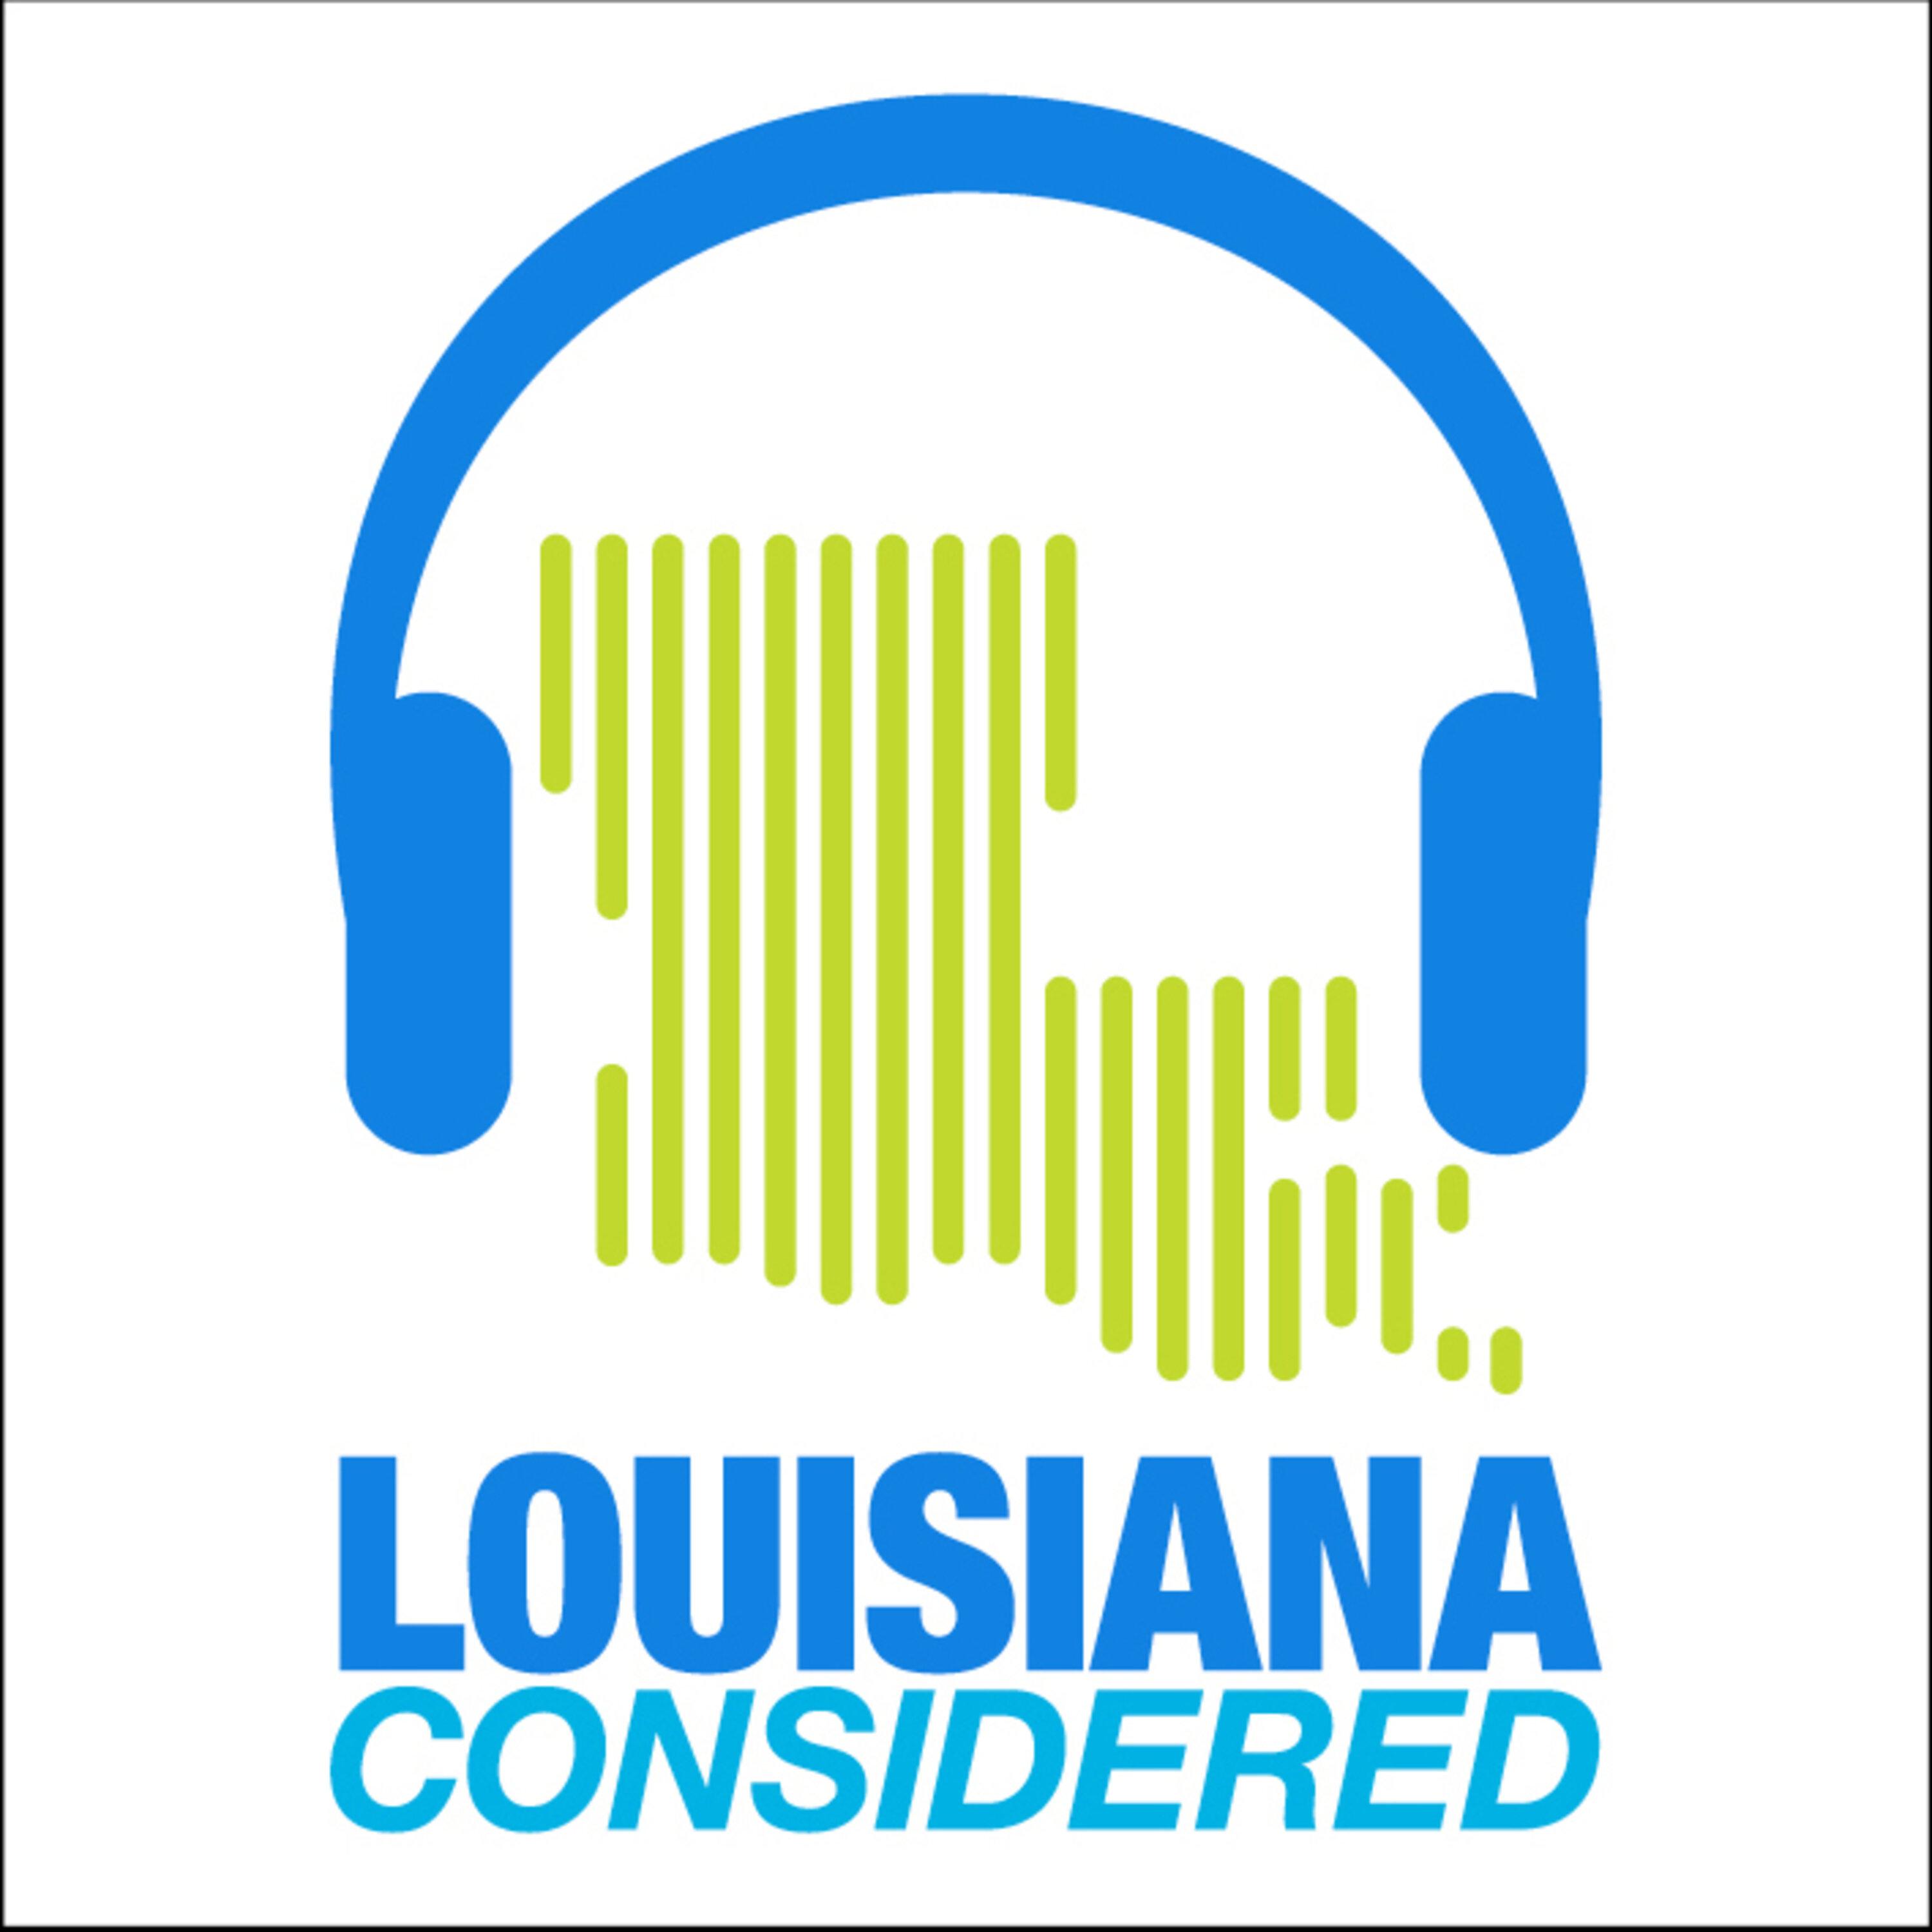 Thumbnail for "Louisiana Considered: Music, movies and festivals in New Orleans this week".